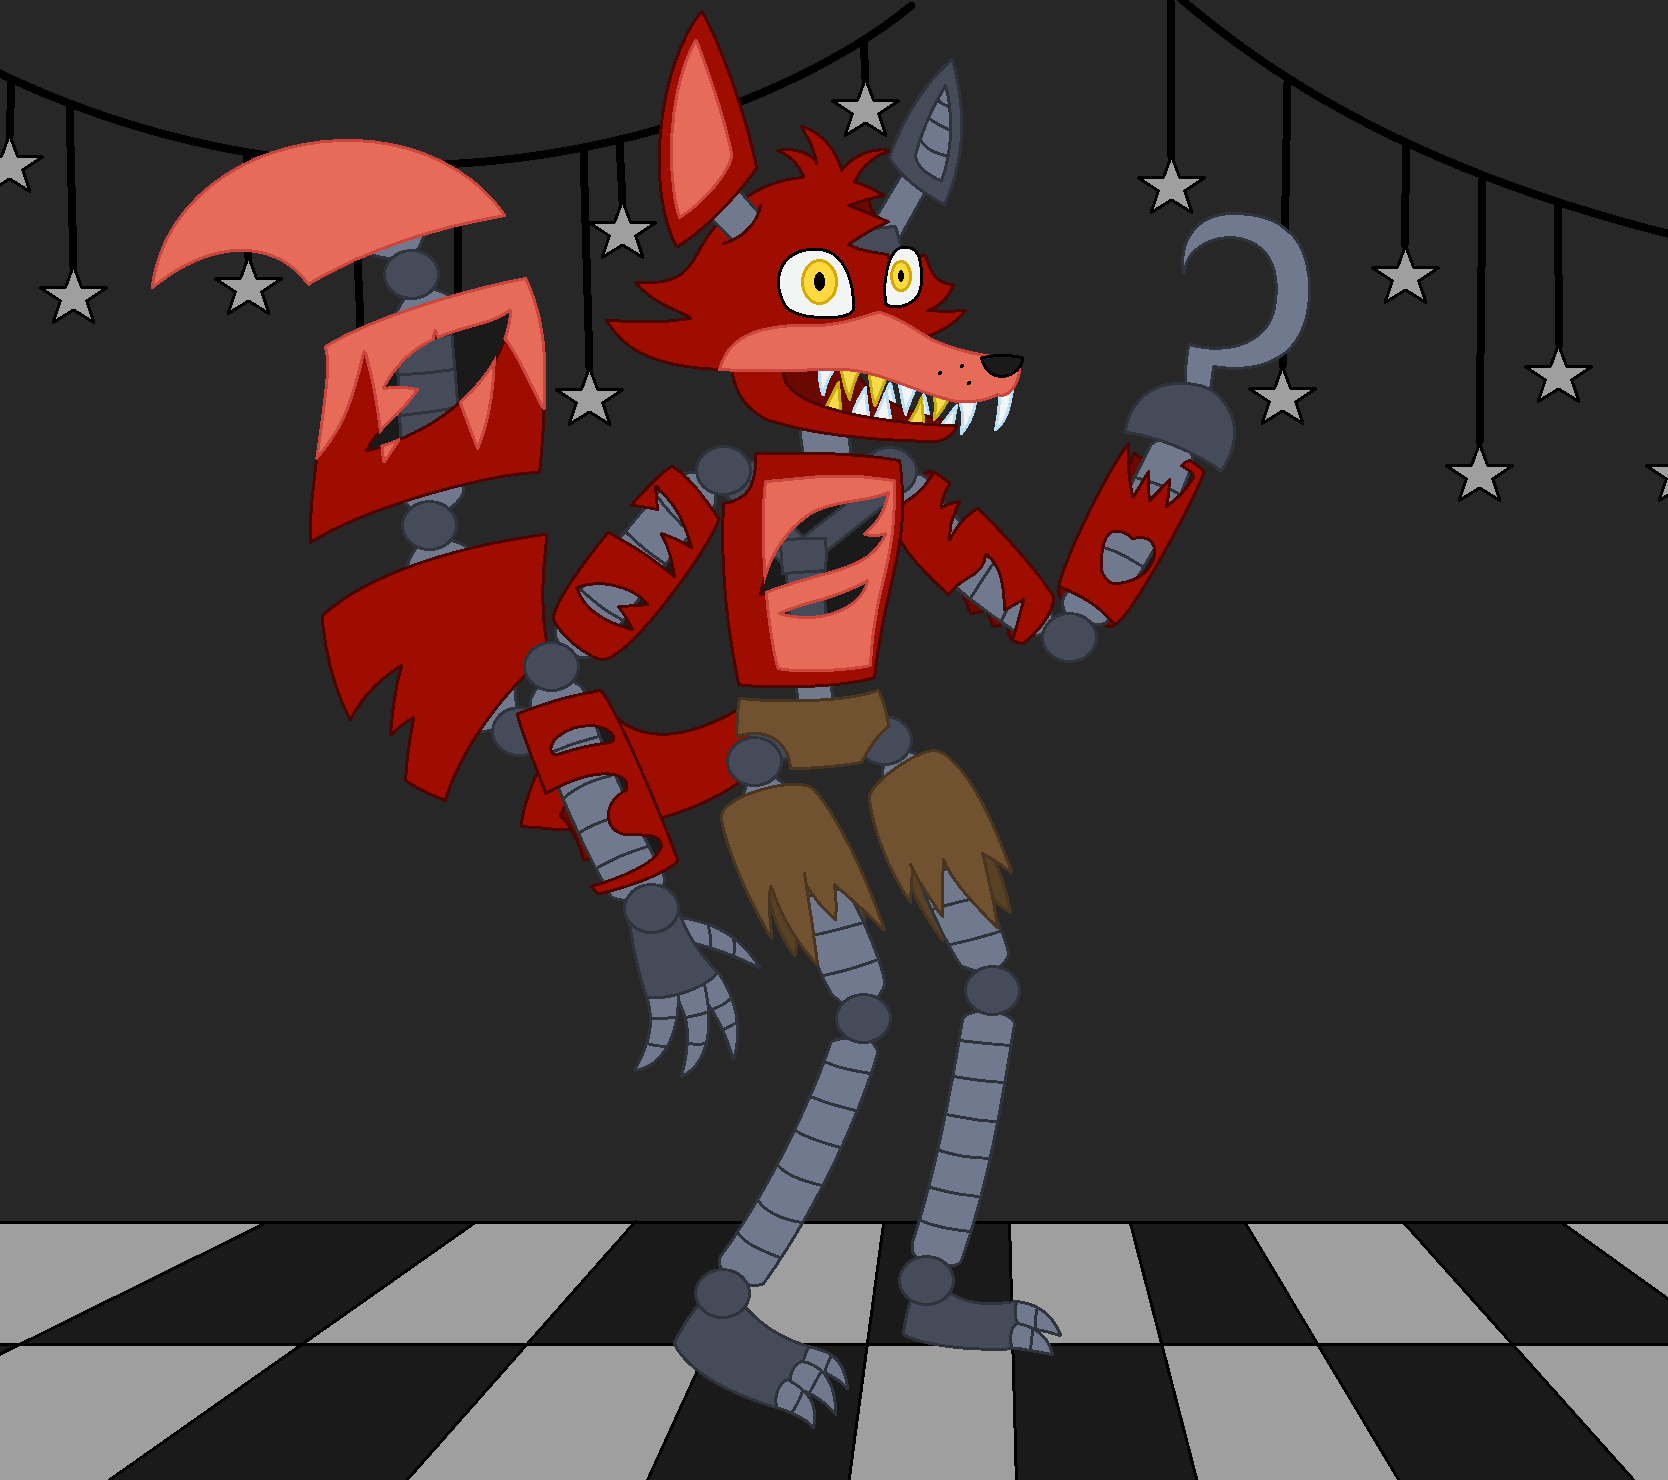 FNAF - Withered Foxy by BootsDotEXE on DeviantArt